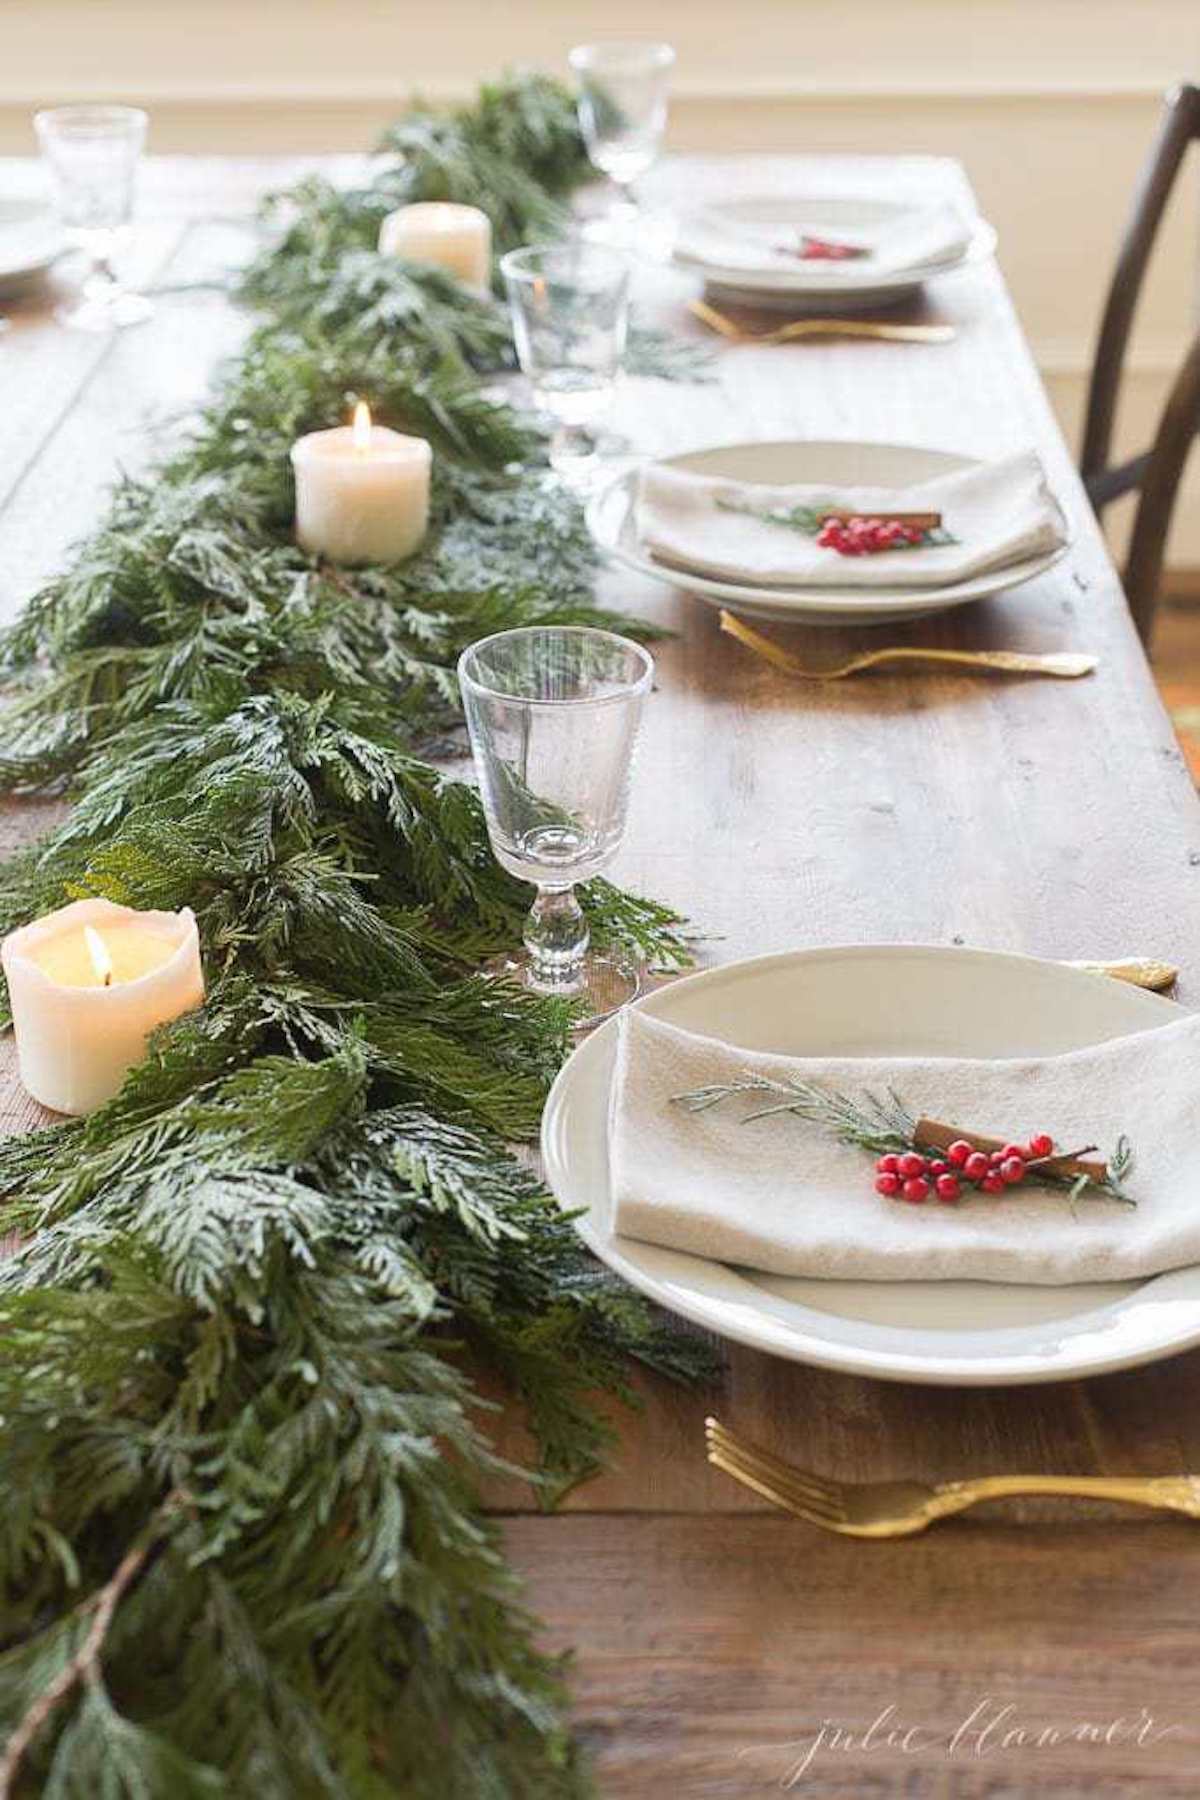 A Christmas table runner featuring garland adorned with greenery and pine cones.